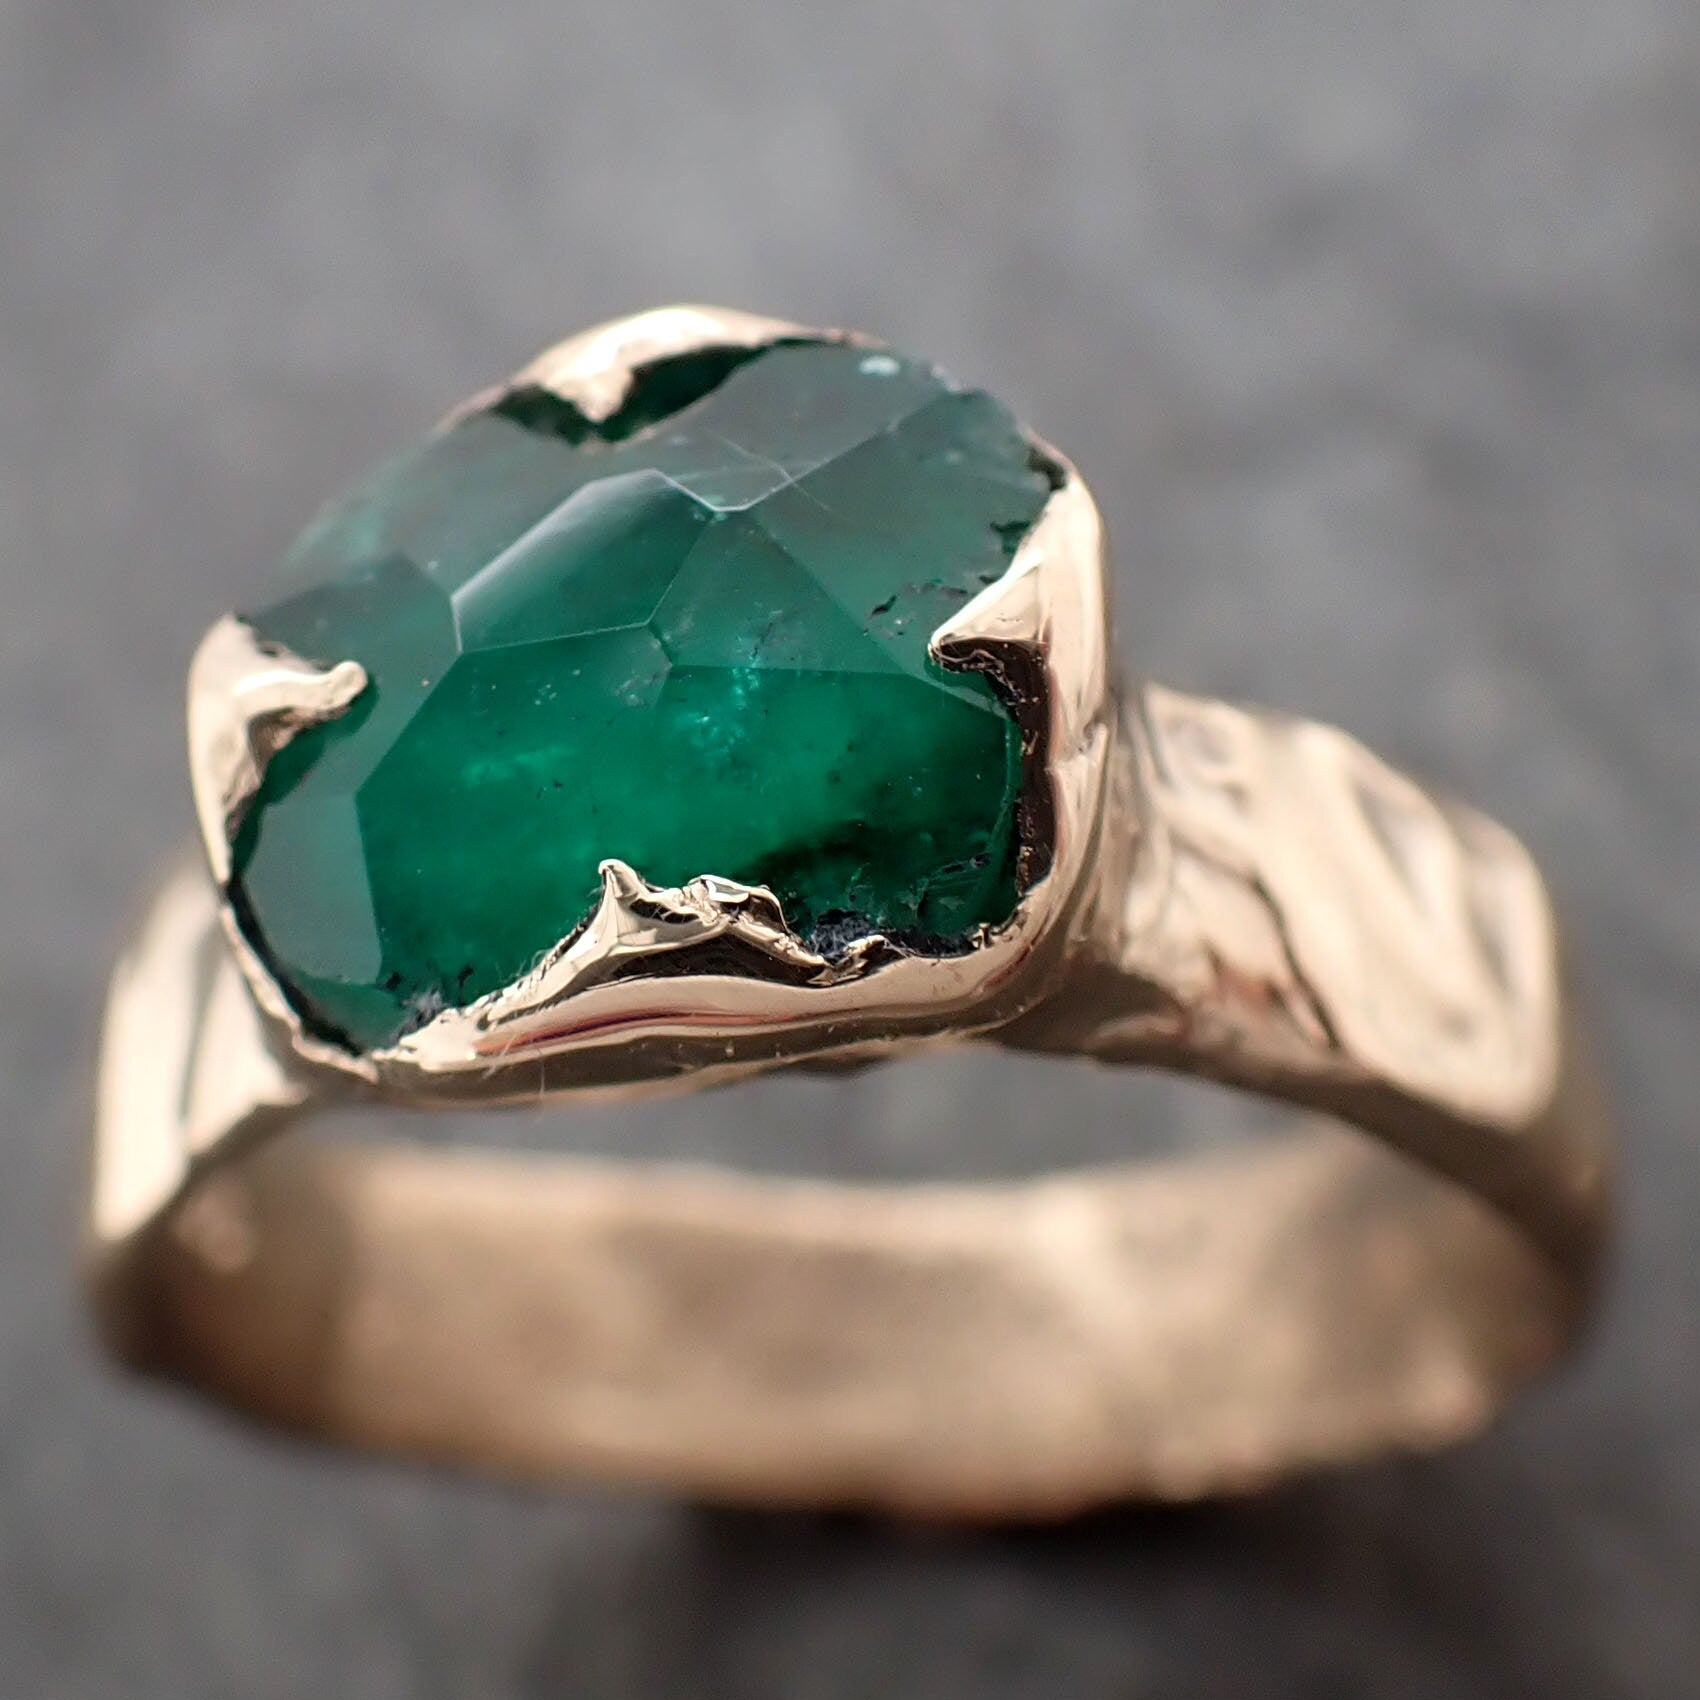 Partially Faceted Emerald Solitaire Mens yellow 14k Gold Ring Birthstone One Of a Kind Gemstone Cocktail Ring Recycled 2943